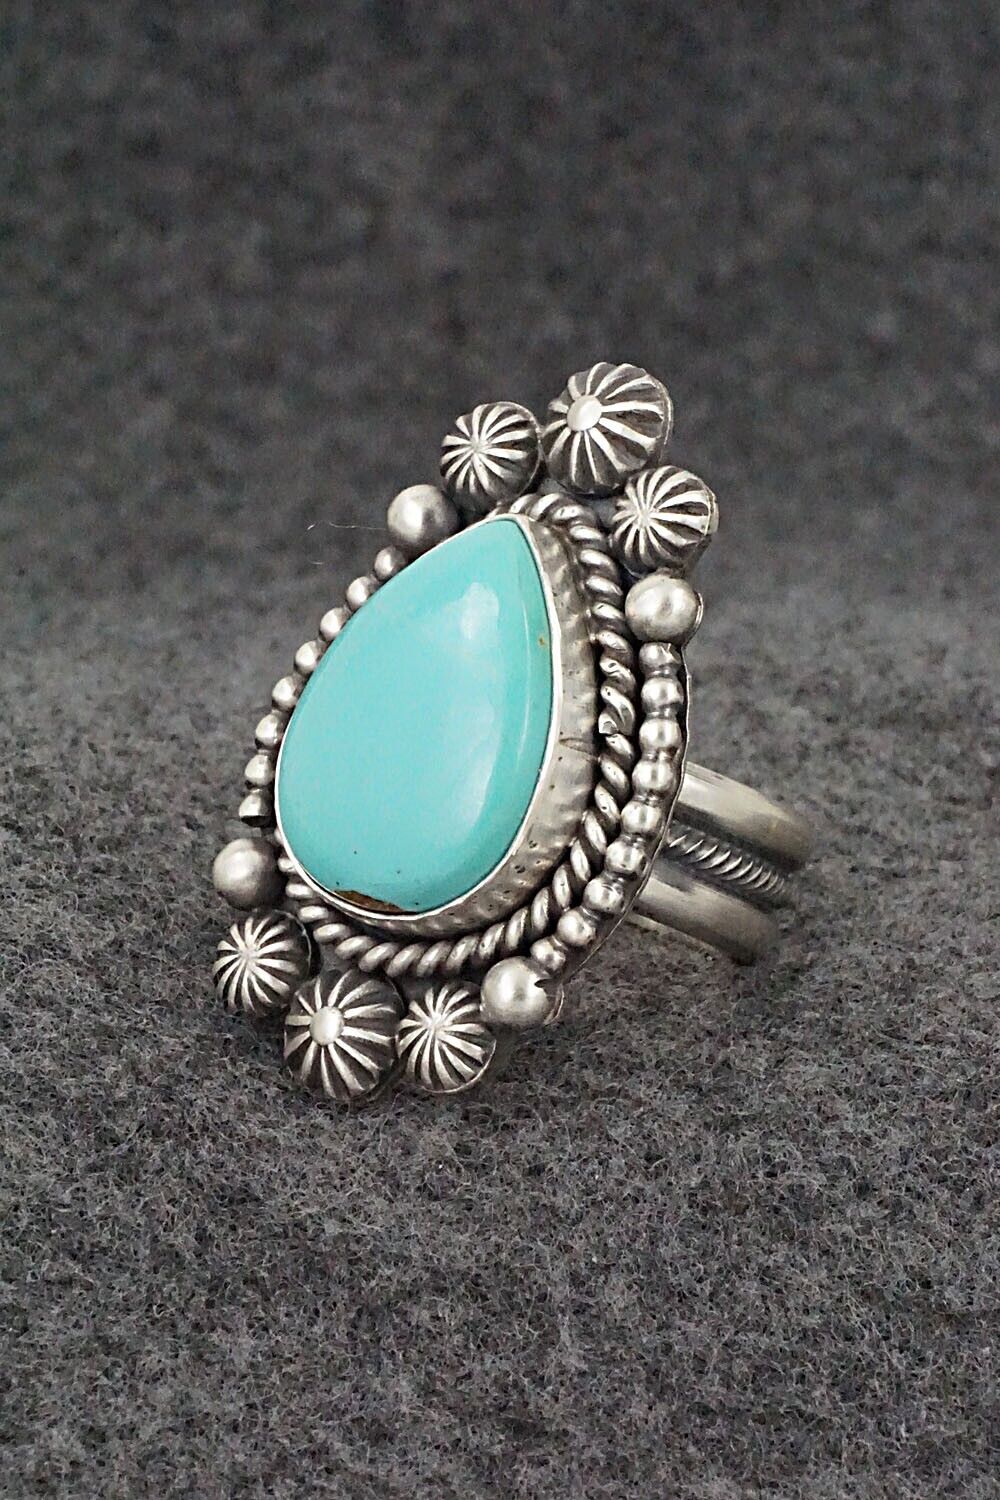 Turquoise & Sterling Silver Ring - Michael Calladitto - Size 8